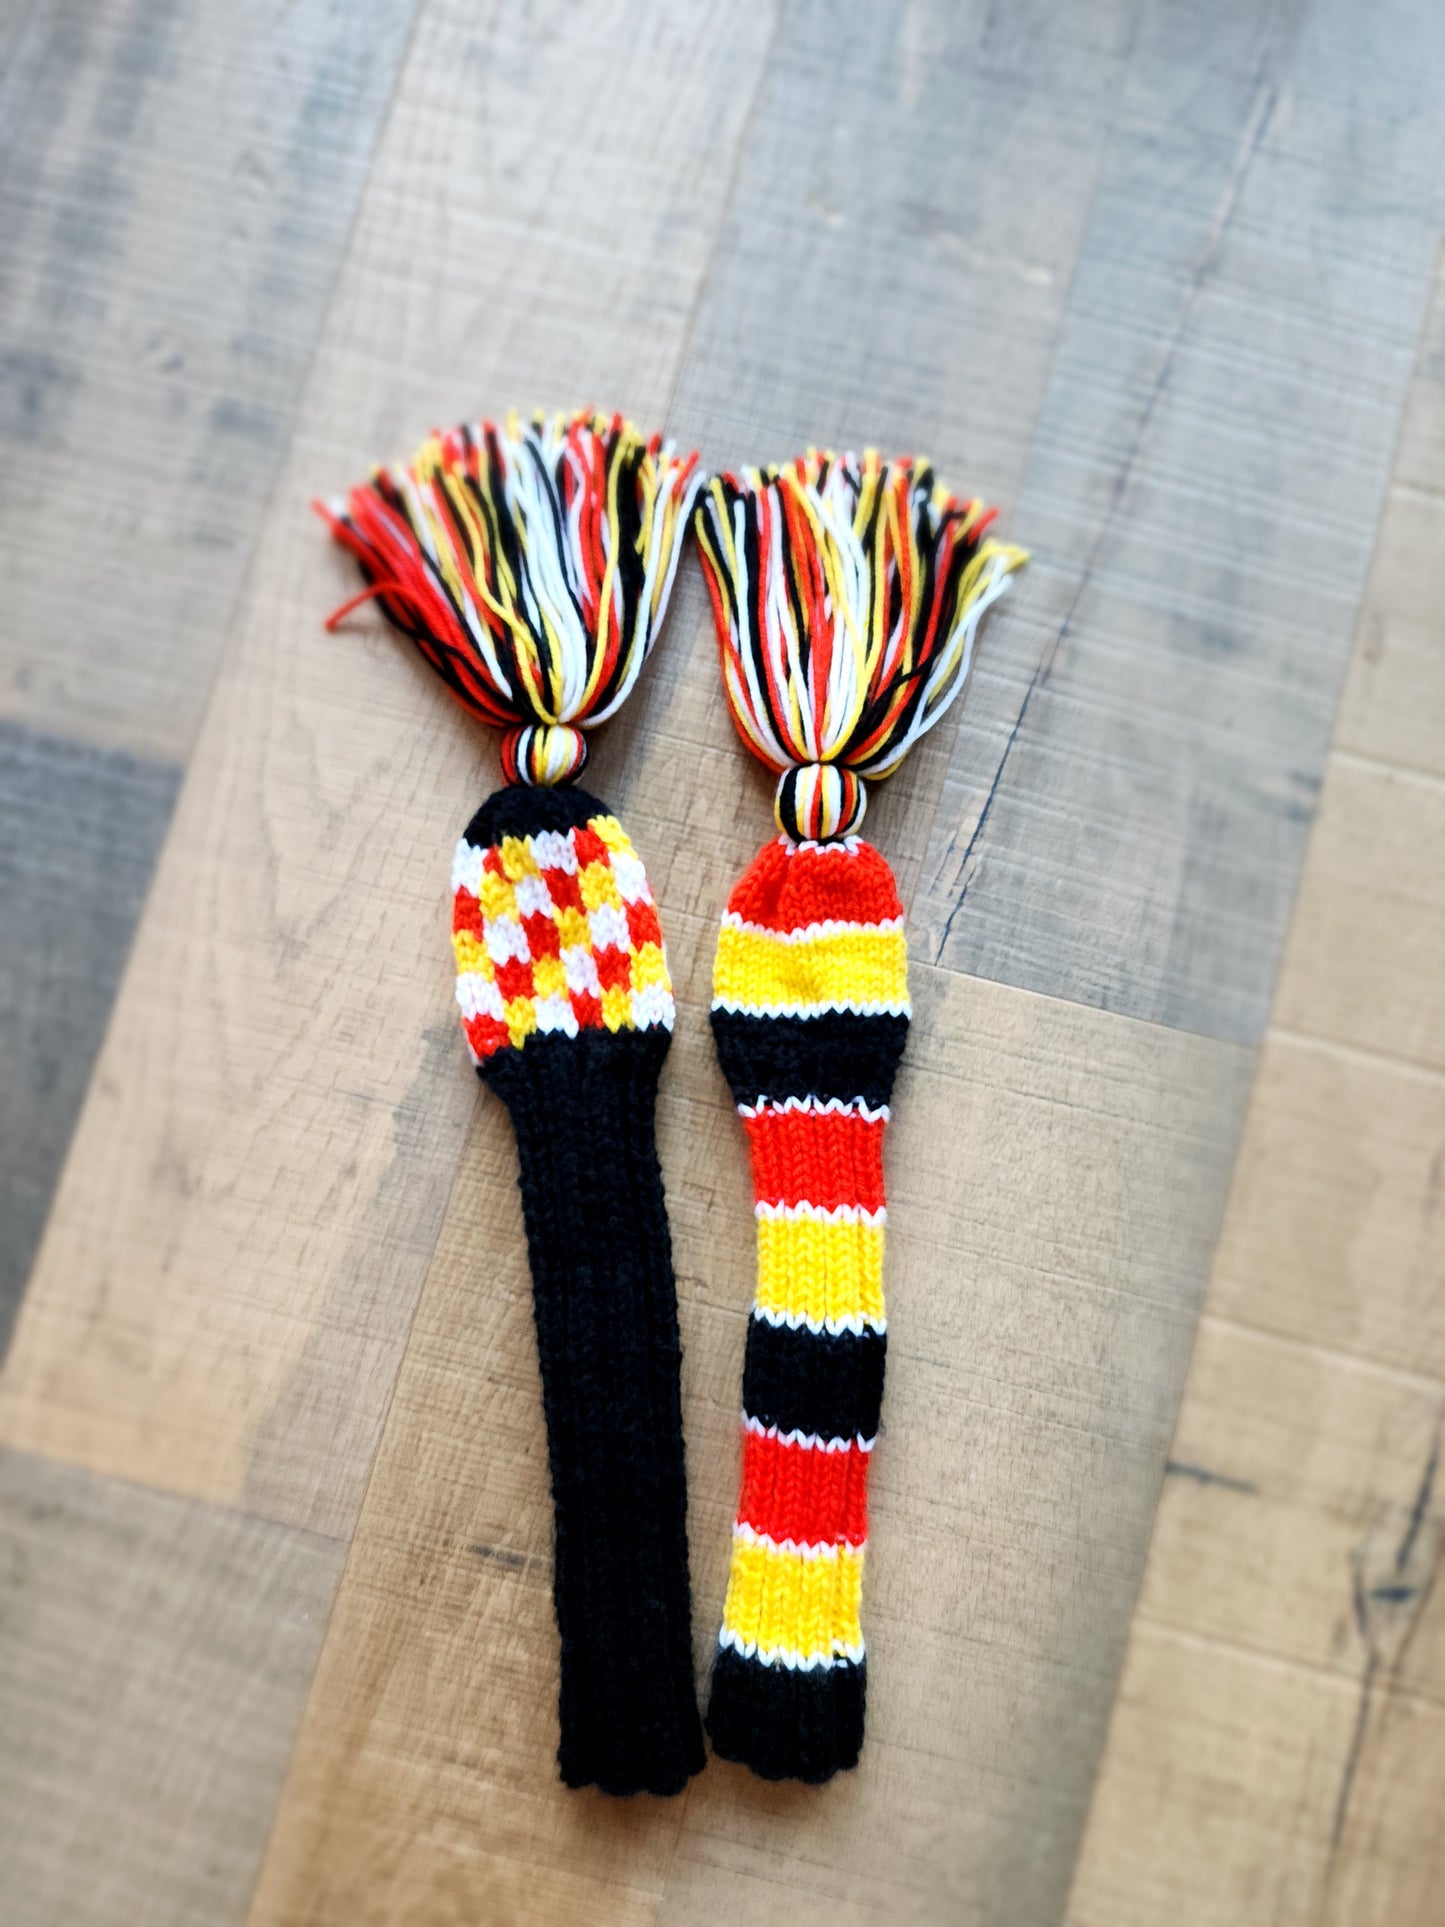 Two Hand Knit Golf Club Head Covers Retro-Vintage Black, Orange, Yellow & White with Tassels for Fairway Woods - Austinknittylimits